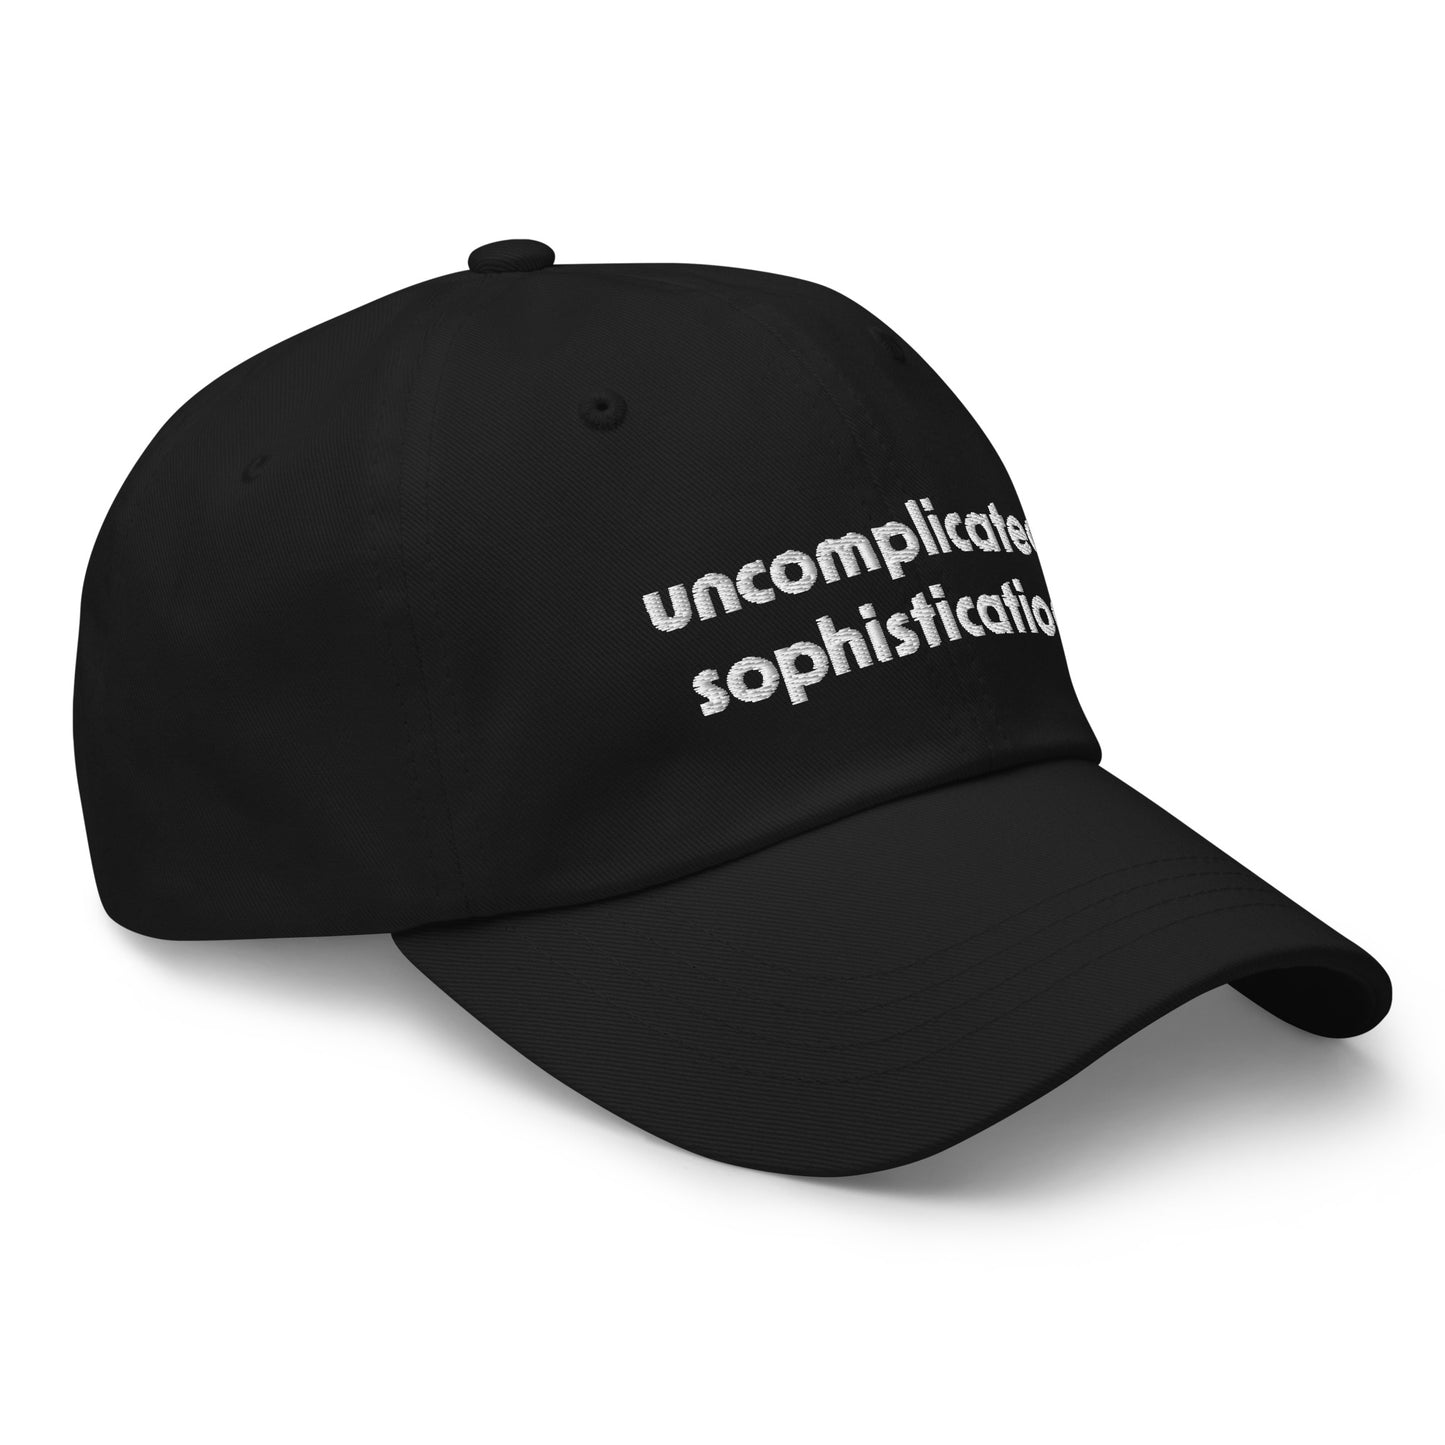 #UncomplicatedSophistication - Embroidered Dad Hat